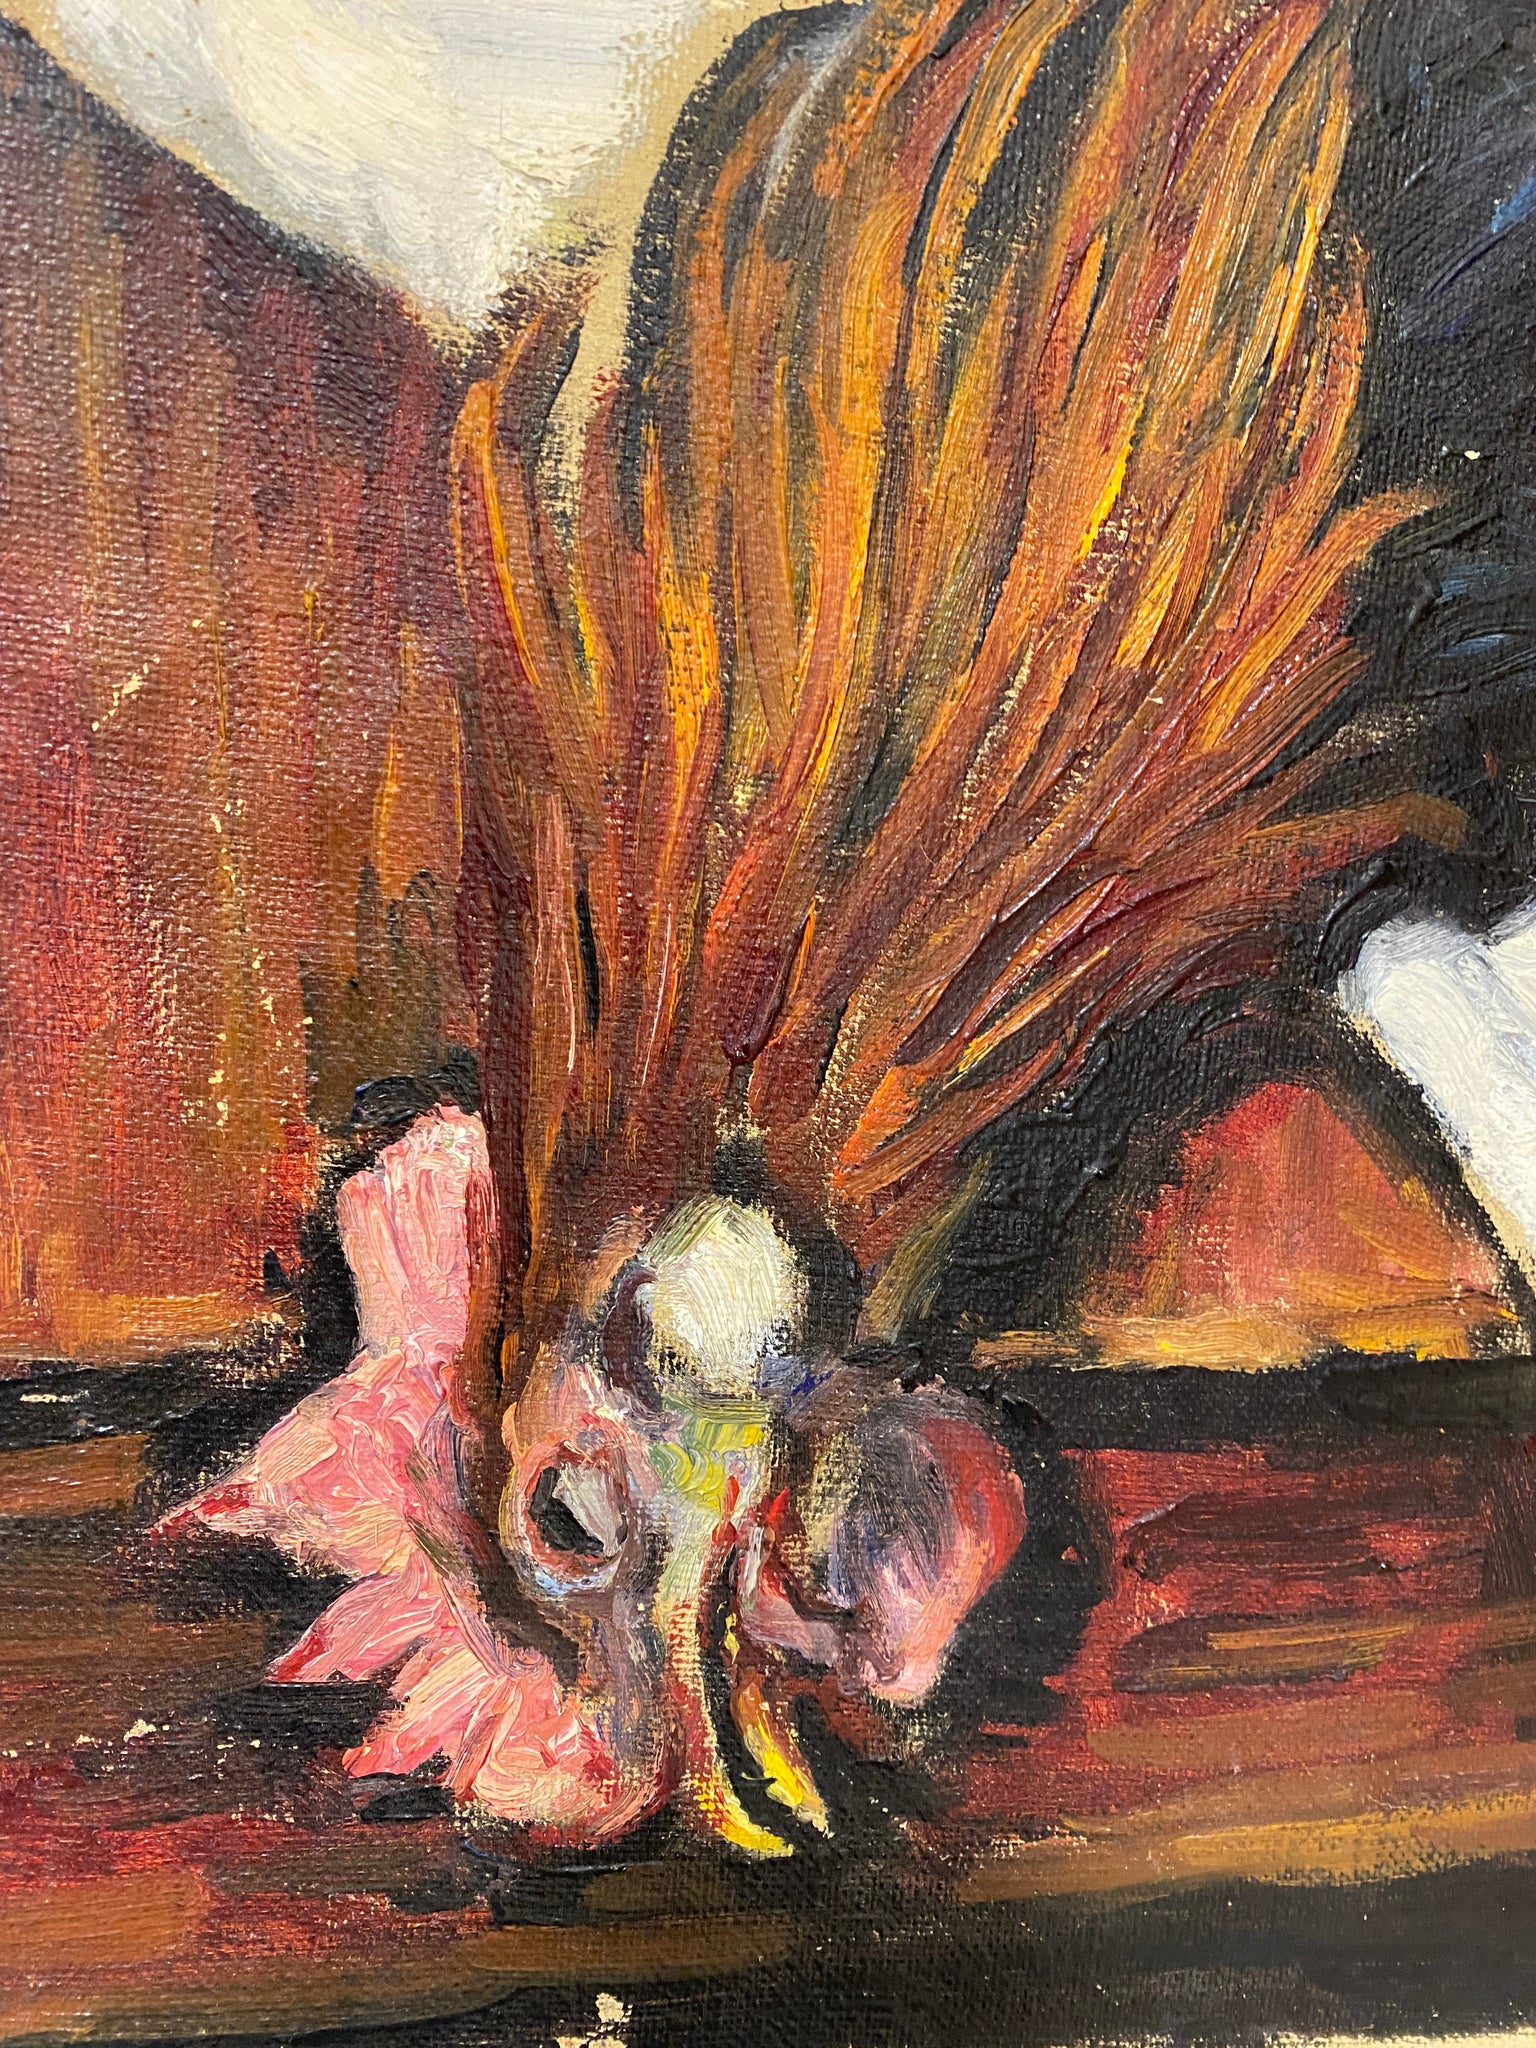 French Oil on Canvas of Rooster